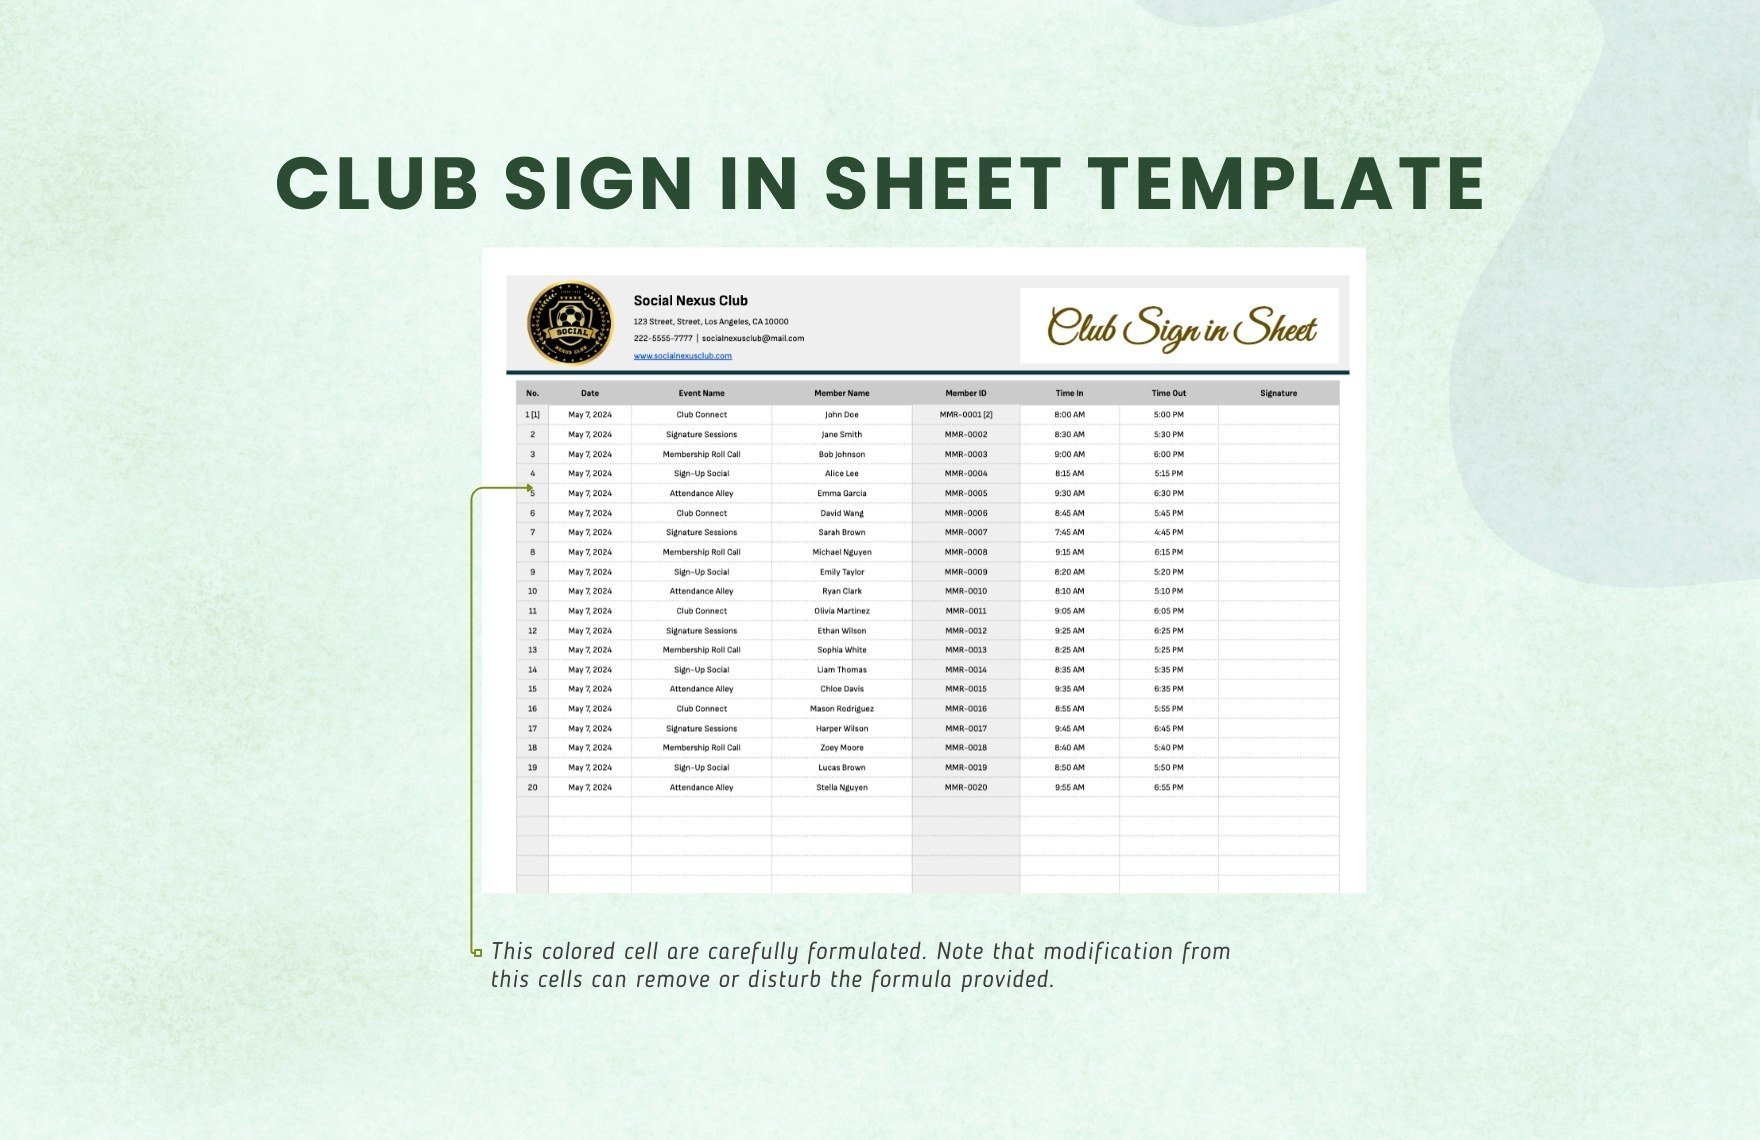 Club Sign in Sheet Template